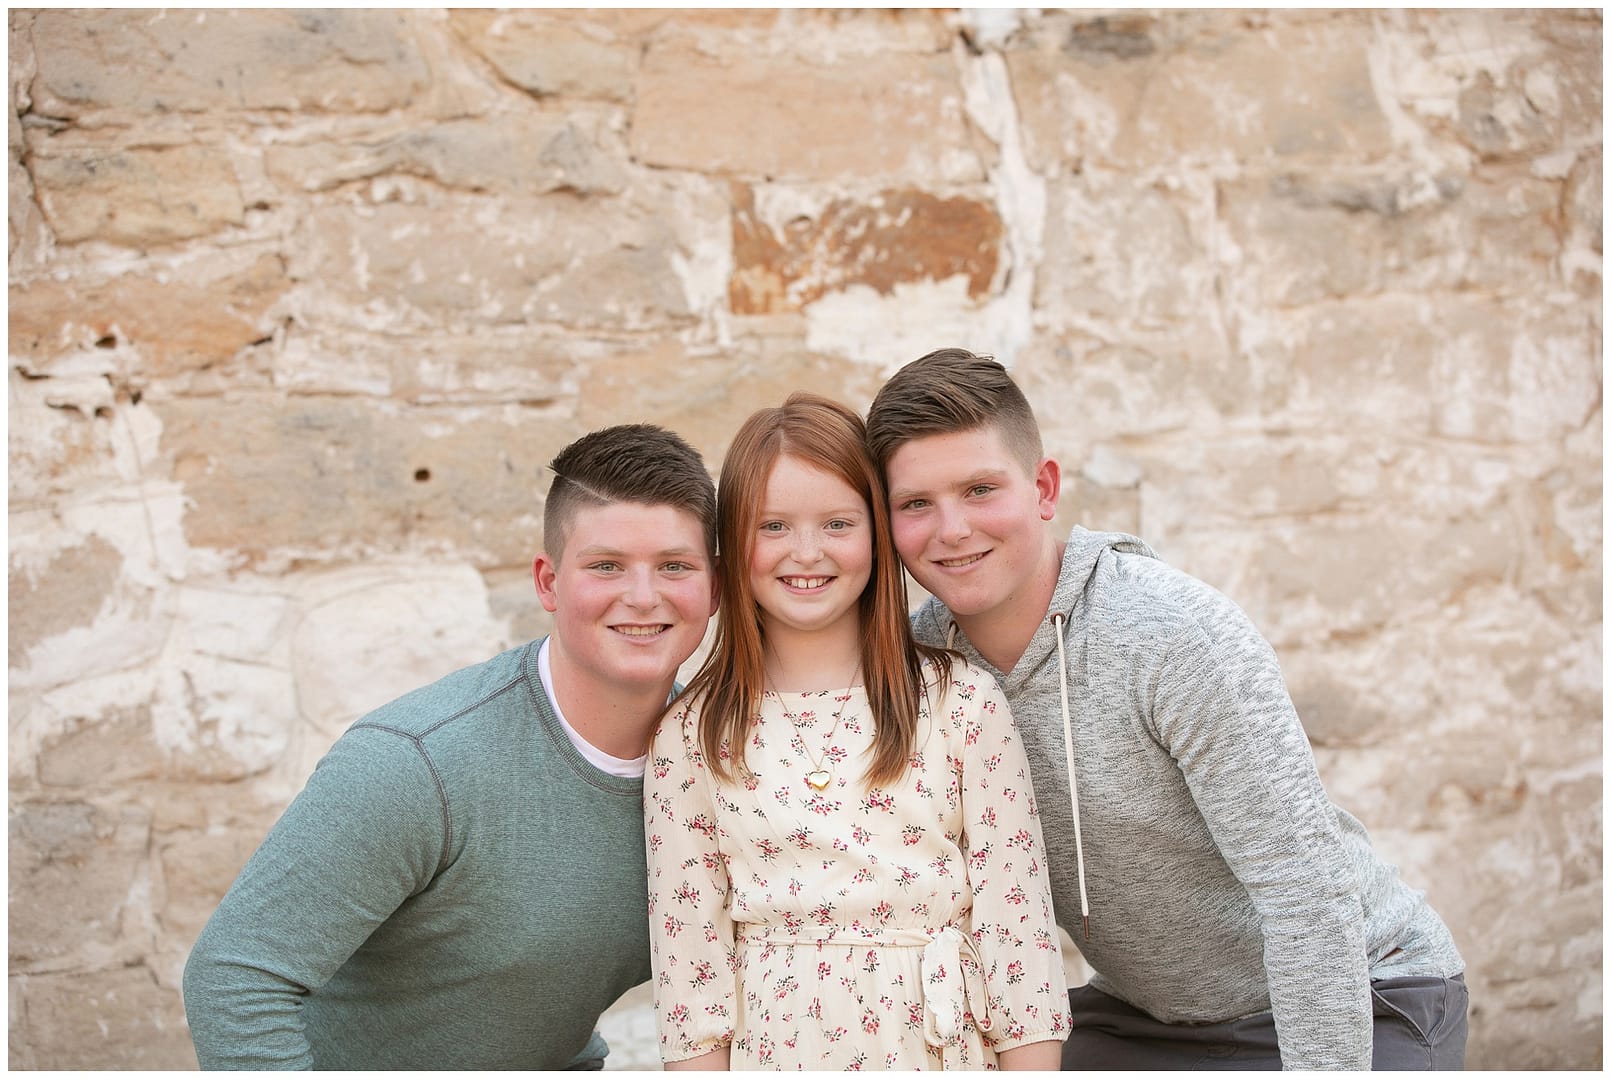 Twin brothers and their younger sister. Photo by Tiffany Hix Photography.